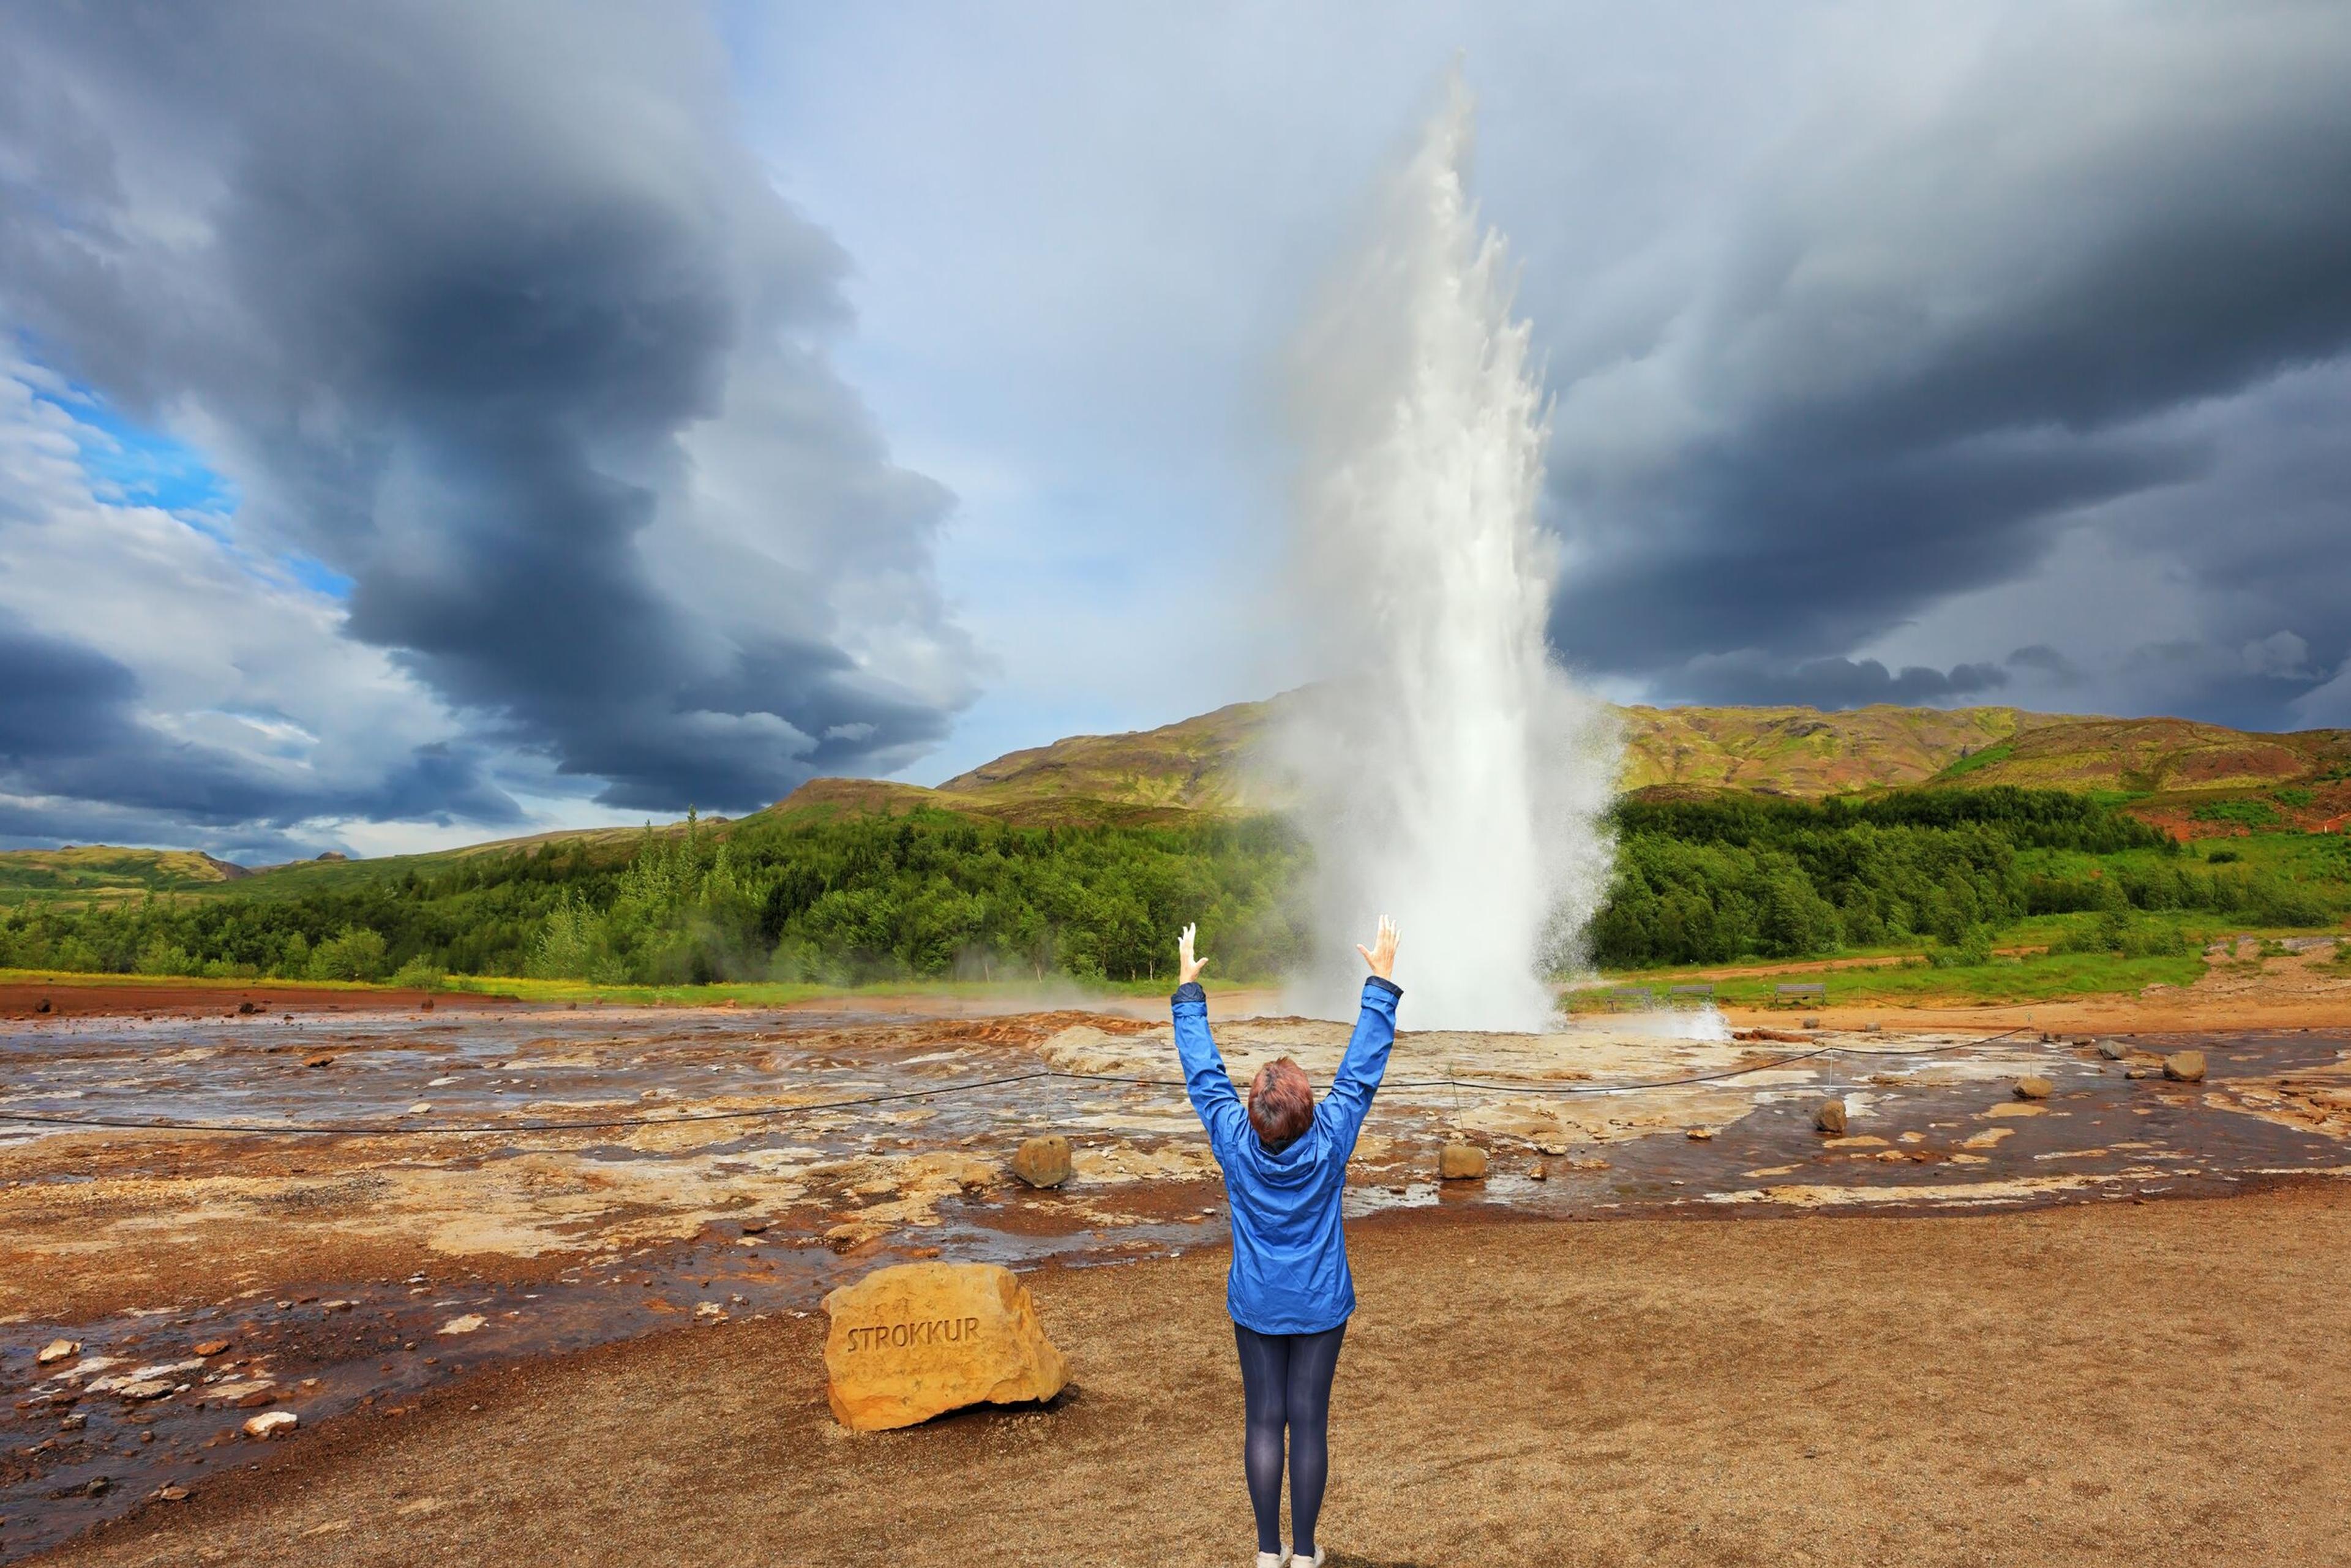 Child in blue jacket with arms raised stands in front of Strokkur geyser erupting at the Golden Circle, Iceland. Dramatic clouds loom overhead, and the ground is marked with geothermal mineral deposits.